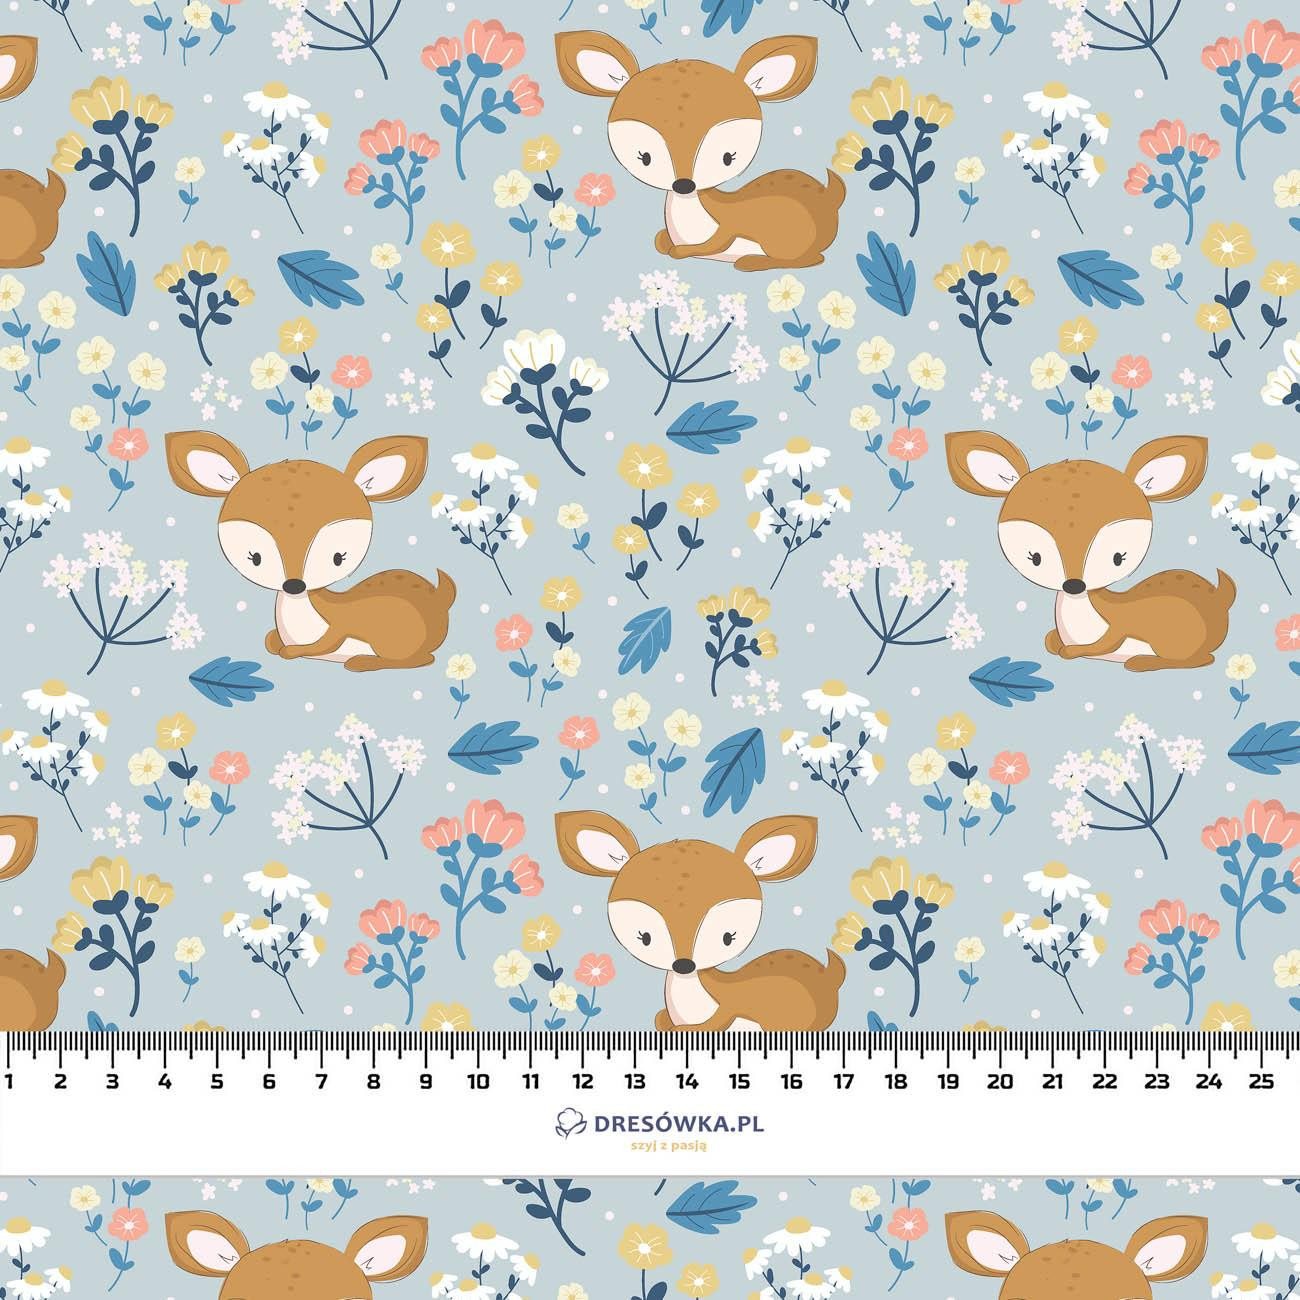 DEERS ON A MEADOW pat. 2 - Cotton woven fabric